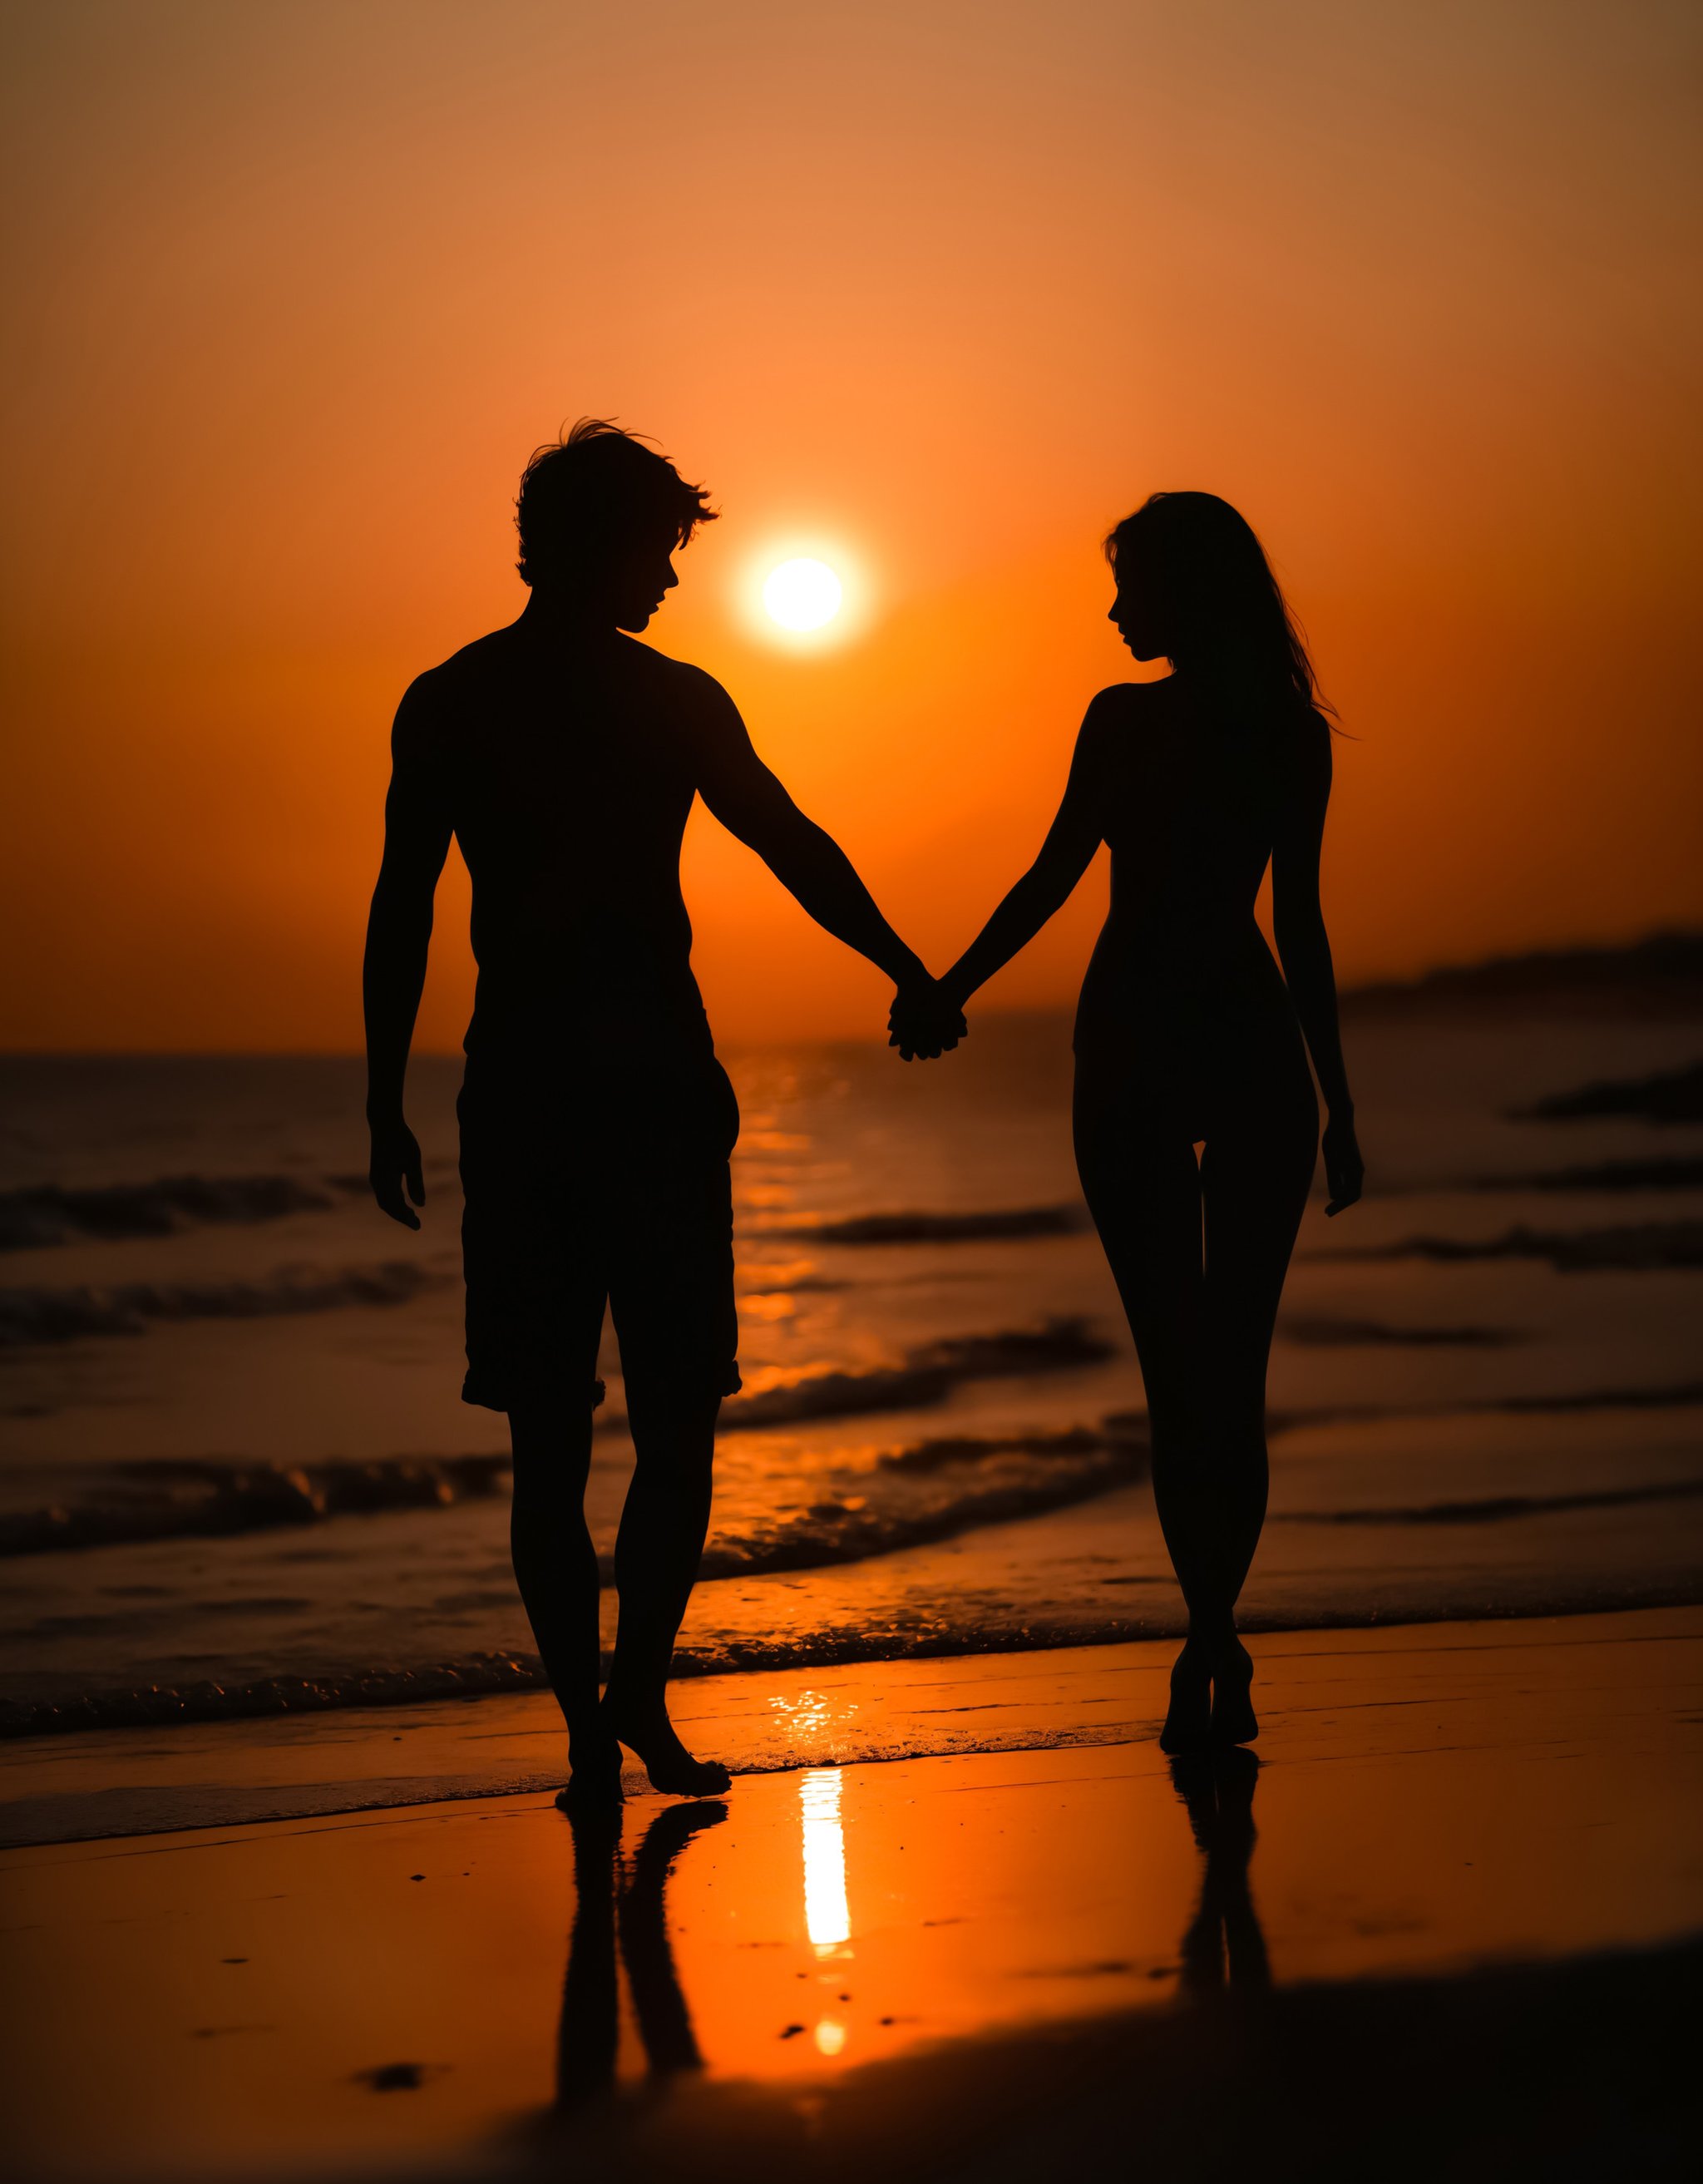 zavy-slhtt, silhouette of a couple holding hands on a beach with the setting sun behind them., 100mm f/2.8 macro lens,